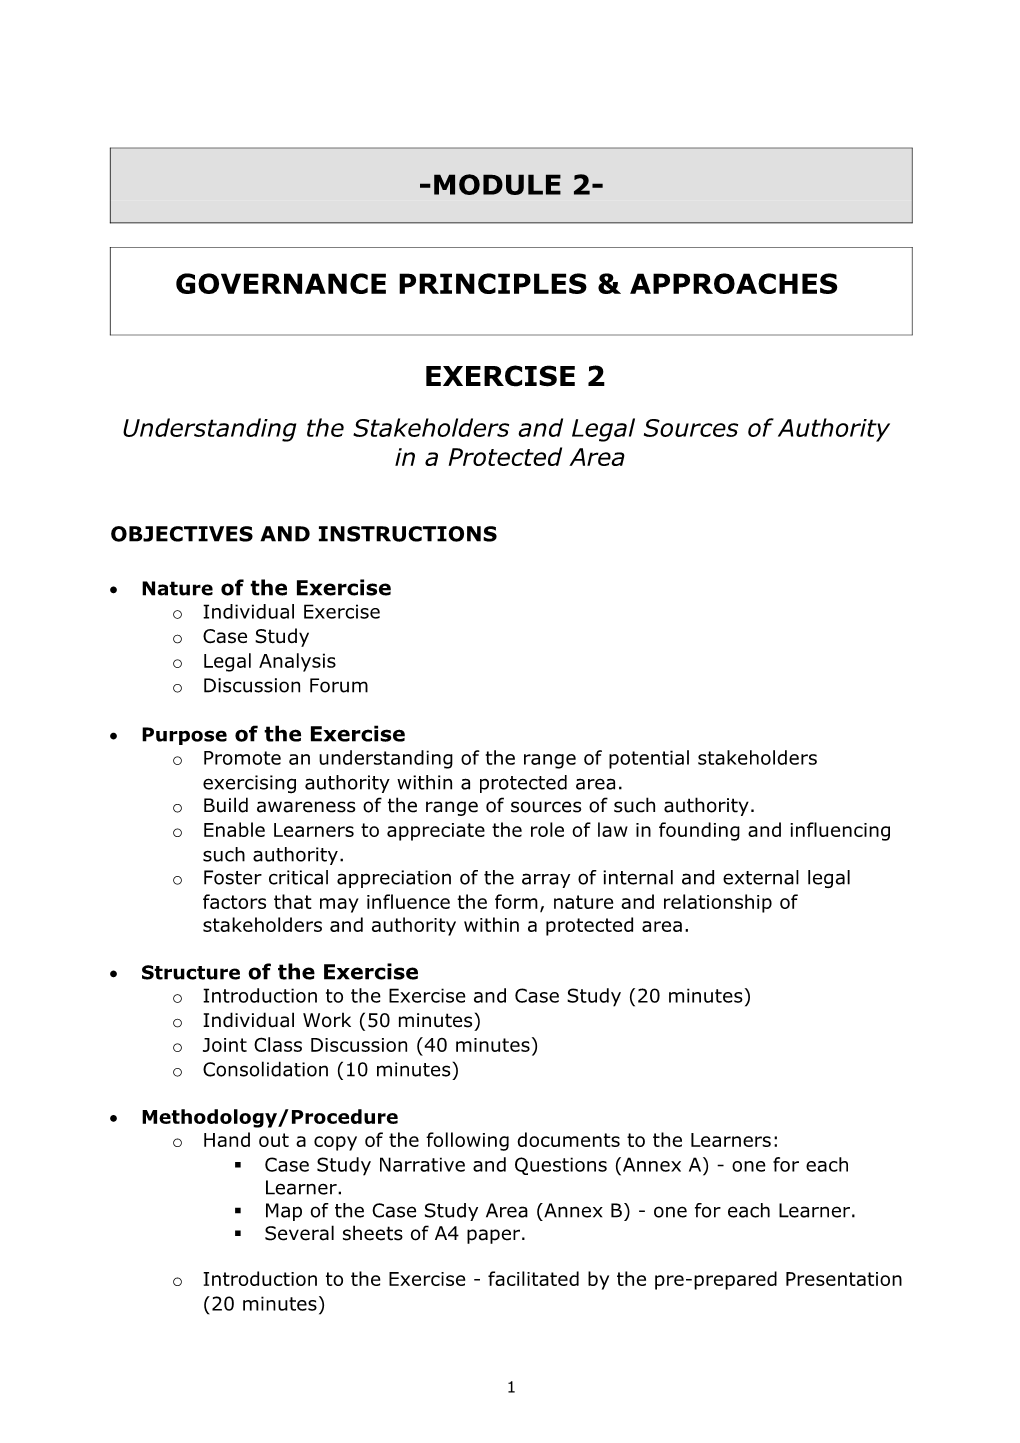 Governance Principles & Approaches